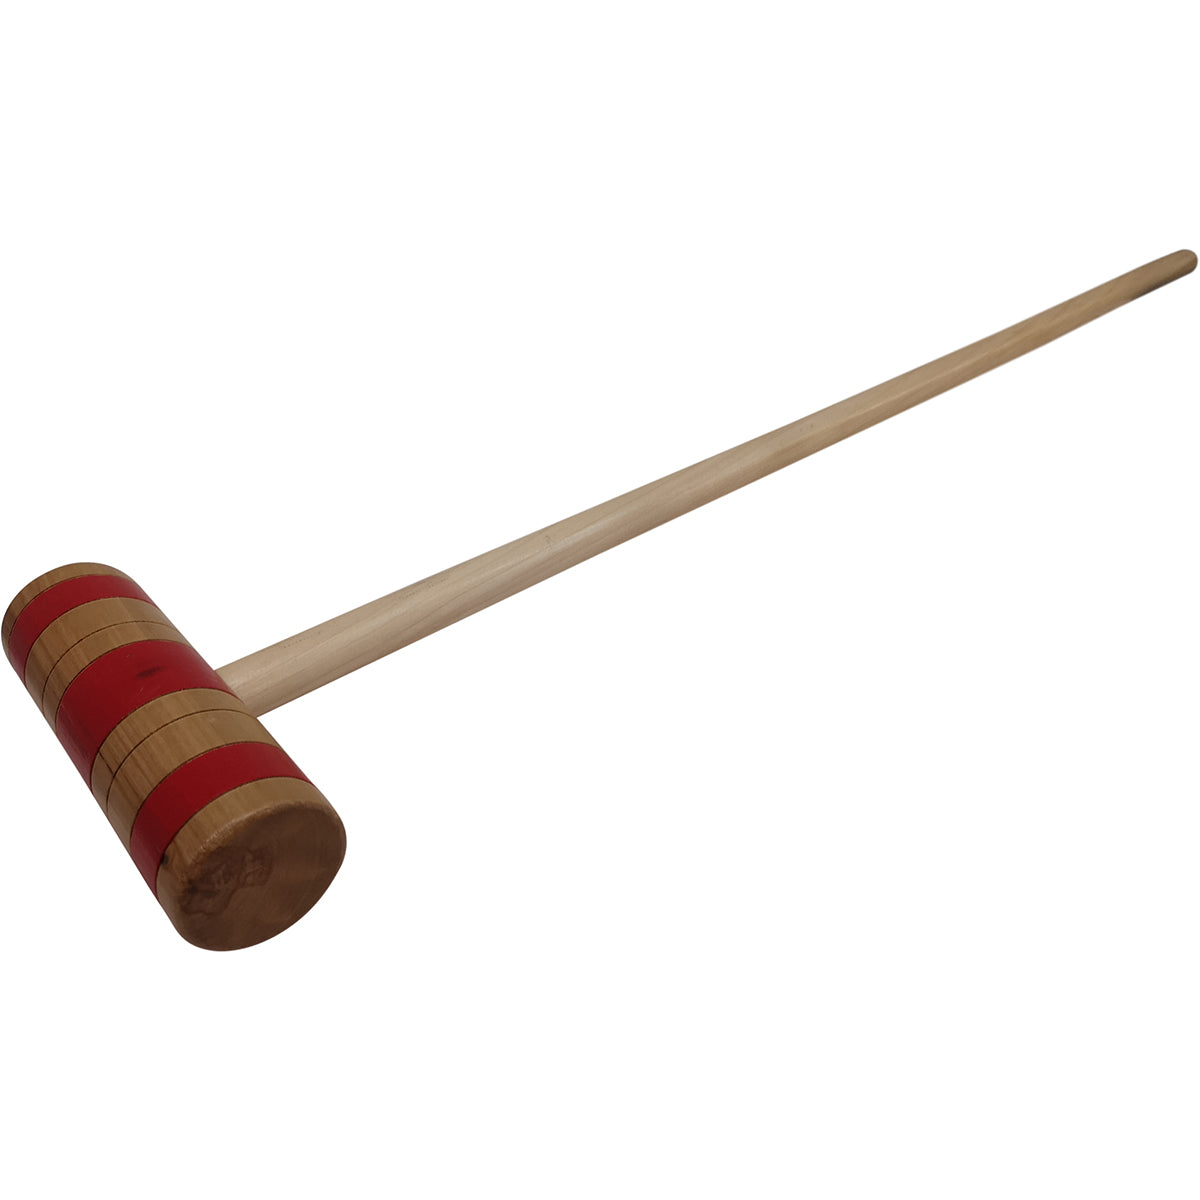 TRADITIONAL GARDEN GAMES Family Croquet Replacement Parts Red Mallet